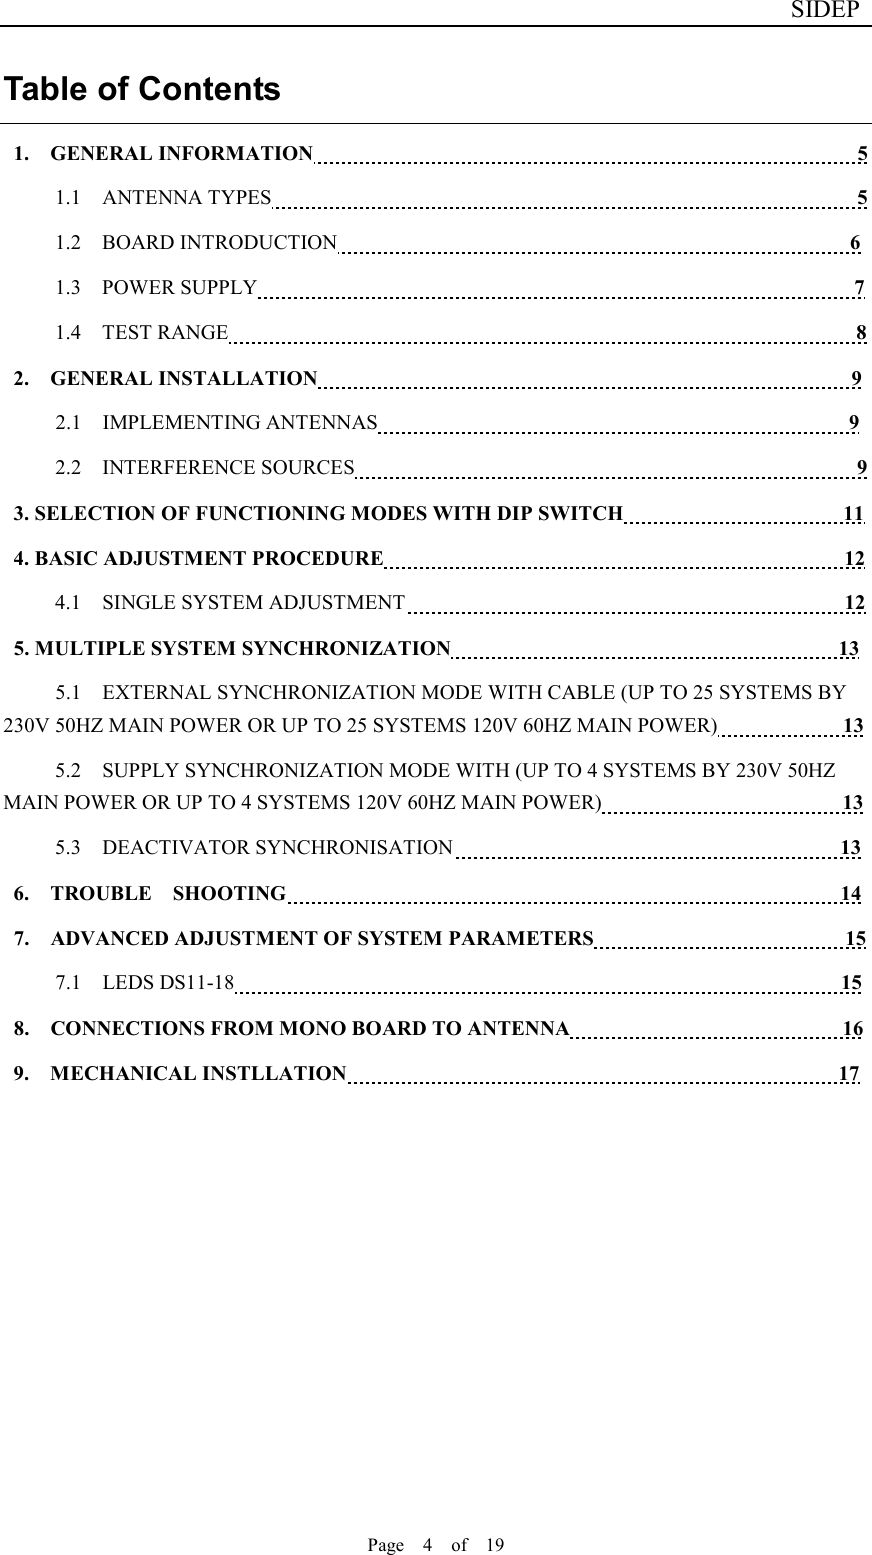                              SIDEP Page    4    of    19   Table of Contents 1.  GENERAL INFORMATION                                                    5 1.1    ANTENNA TYPES                                                        5 1.2    BOARD INTRODUCTION                                                 6 1.3    POWER SUPPLY                                                         7 1.4    TEST RANGE                                                            8                    2.  GENERAL INSTALLATION                                                   9         2.1    IMPLEMENTING ANTENNAS                                             9 2.2    INTERFERENCE SOURCES                                                9 3. SELECTION OF FUNCTIONING MODES WITH DIP SWITCH                                          11 4. BASIC ADJUSTMENT PROCEDURE                                                                                        12 4.1    SINGLE SYSTEM ADJUSTMENT                                          12 5. MULTIPLE SYSTEM SYNCHRONIZATION                                                                          13 5.1    EXTERNAL SYNCHRONIZATION MODE WITH CABLE (UP TO 25 SYSTEMS BY 230V 50HZ MAIN POWER OR UP TO 25 SYSTEMS 120V 60HZ MAIN POWER)            13 5.2    SUPPLY SYNCHRONIZATION MODE WITH (UP TO 4 SYSTEMS BY 230V 50HZ MAIN POWER OR UP TO 4 SYSTEMS 120V 60HZ MAIN POWER)                       13 5.3    DEACTIVATOR SYNCHRONISATION                                     13 6.  TROUBLE  SHOOTING                                                     14 7.    ADVANCED ADJUSTMENT OF SYSTEM PARAMETERS                                                15 7.1    LEDS DS11-18                                                          15 8.    CONNECTIONS FROM MONO BOARD TO ANTENNA                                                    16 9.  MECHANICAL INSTLLATION                                               17      